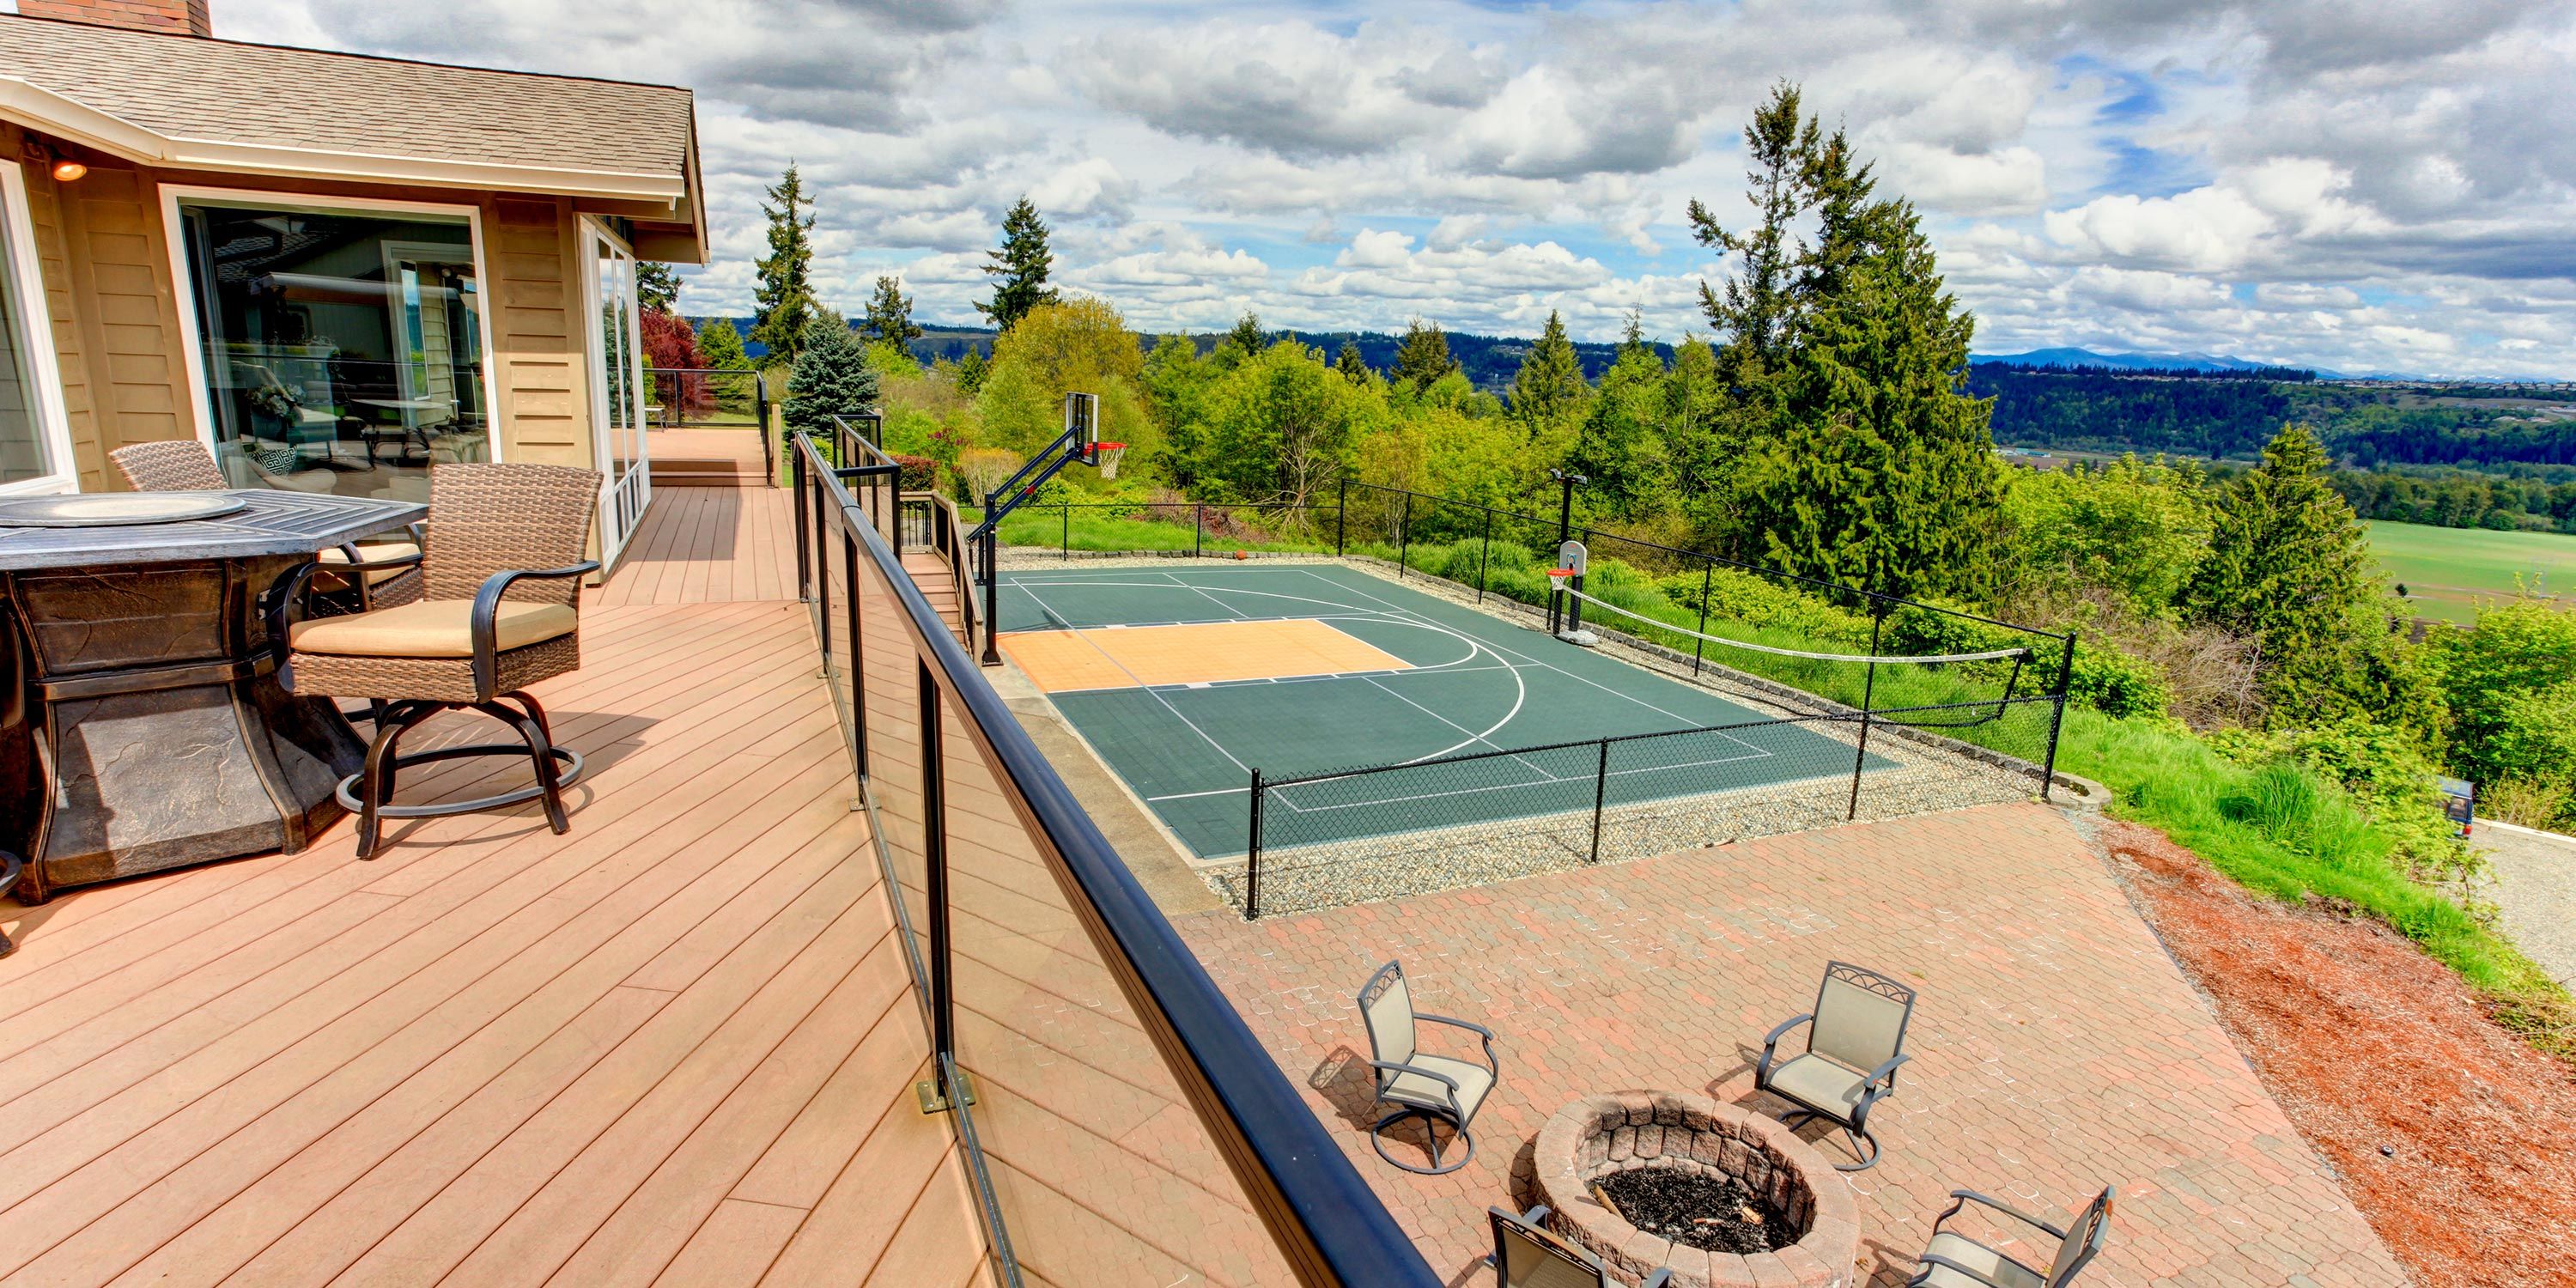 Basketball court in the backyard of a wood colored house